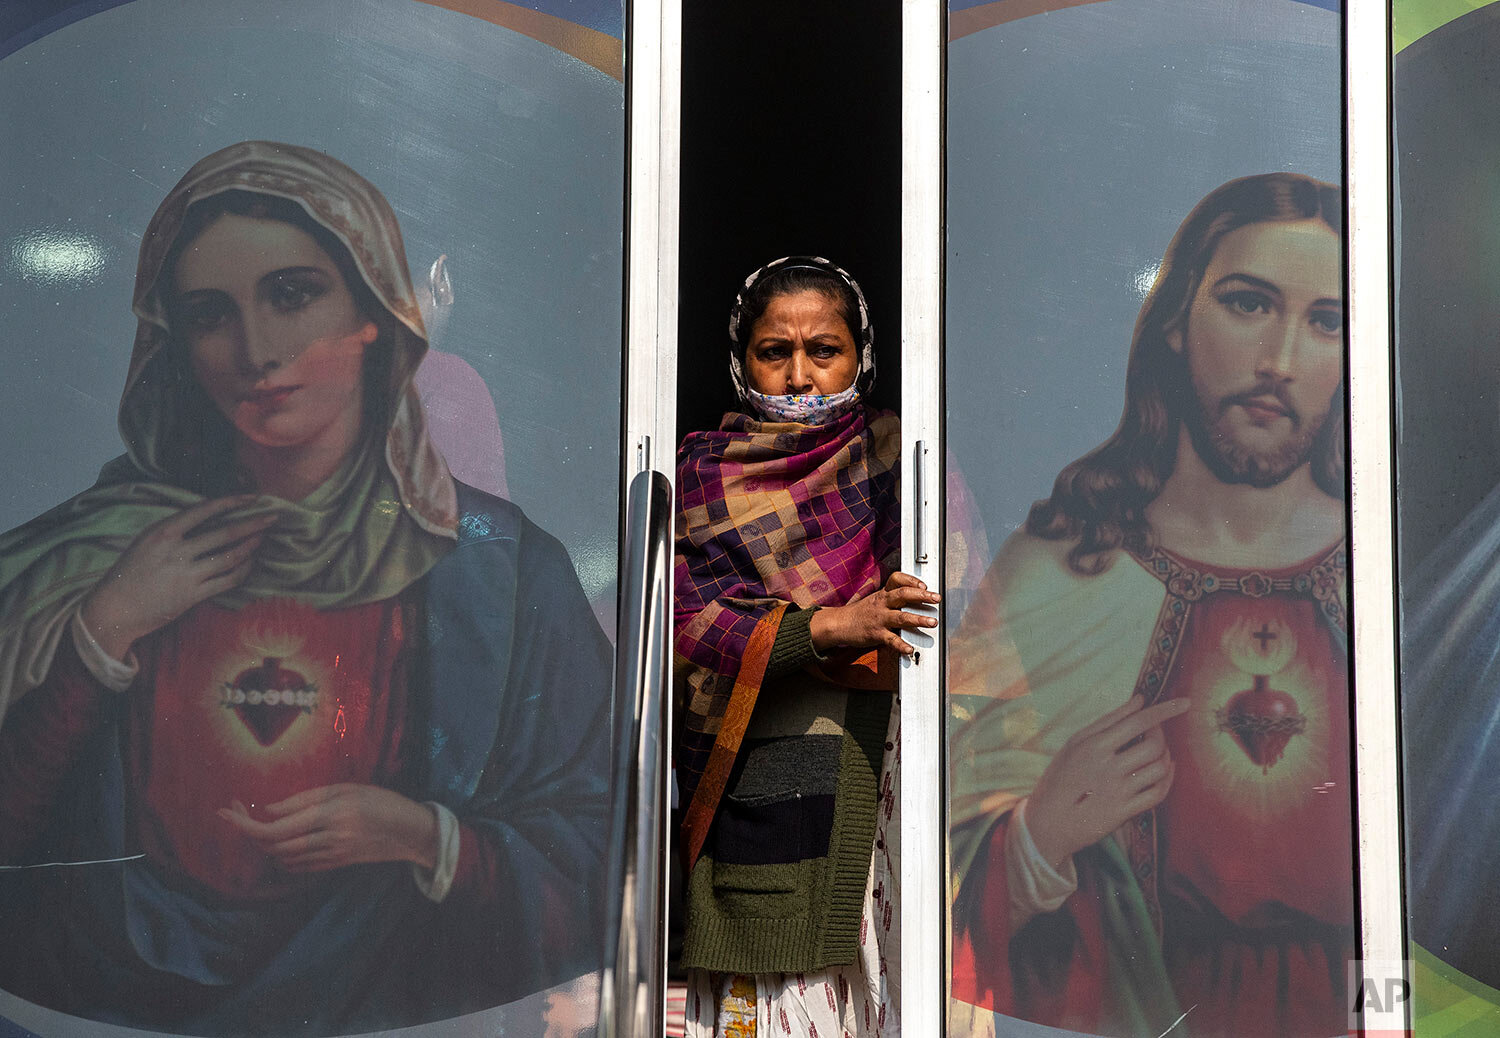  A Christian woman, partially wearing a face mask as a precaution against the coronavirus, leaves after attending a Christmas mass at a church in Gauhati, India, Friday, Dec. 25, 2020. (AP Photo/Anupam Nath) 